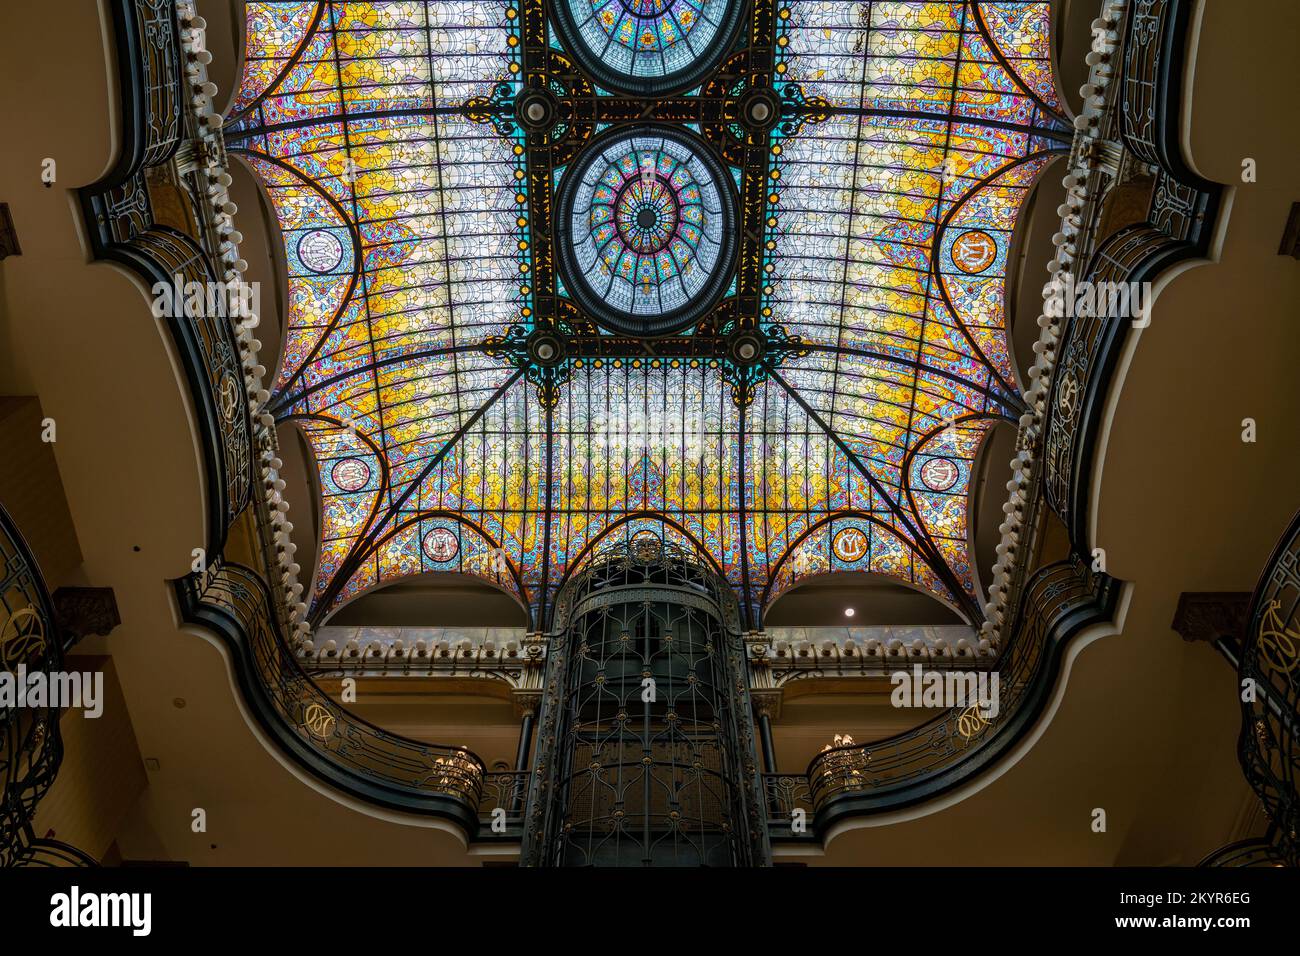 Looking up from the main lobby at a magnificent work of Art Nouveau—the Tiffany stained glass ceiling of the elegant Gran Hotel de la Ciudad de México Stock Photo